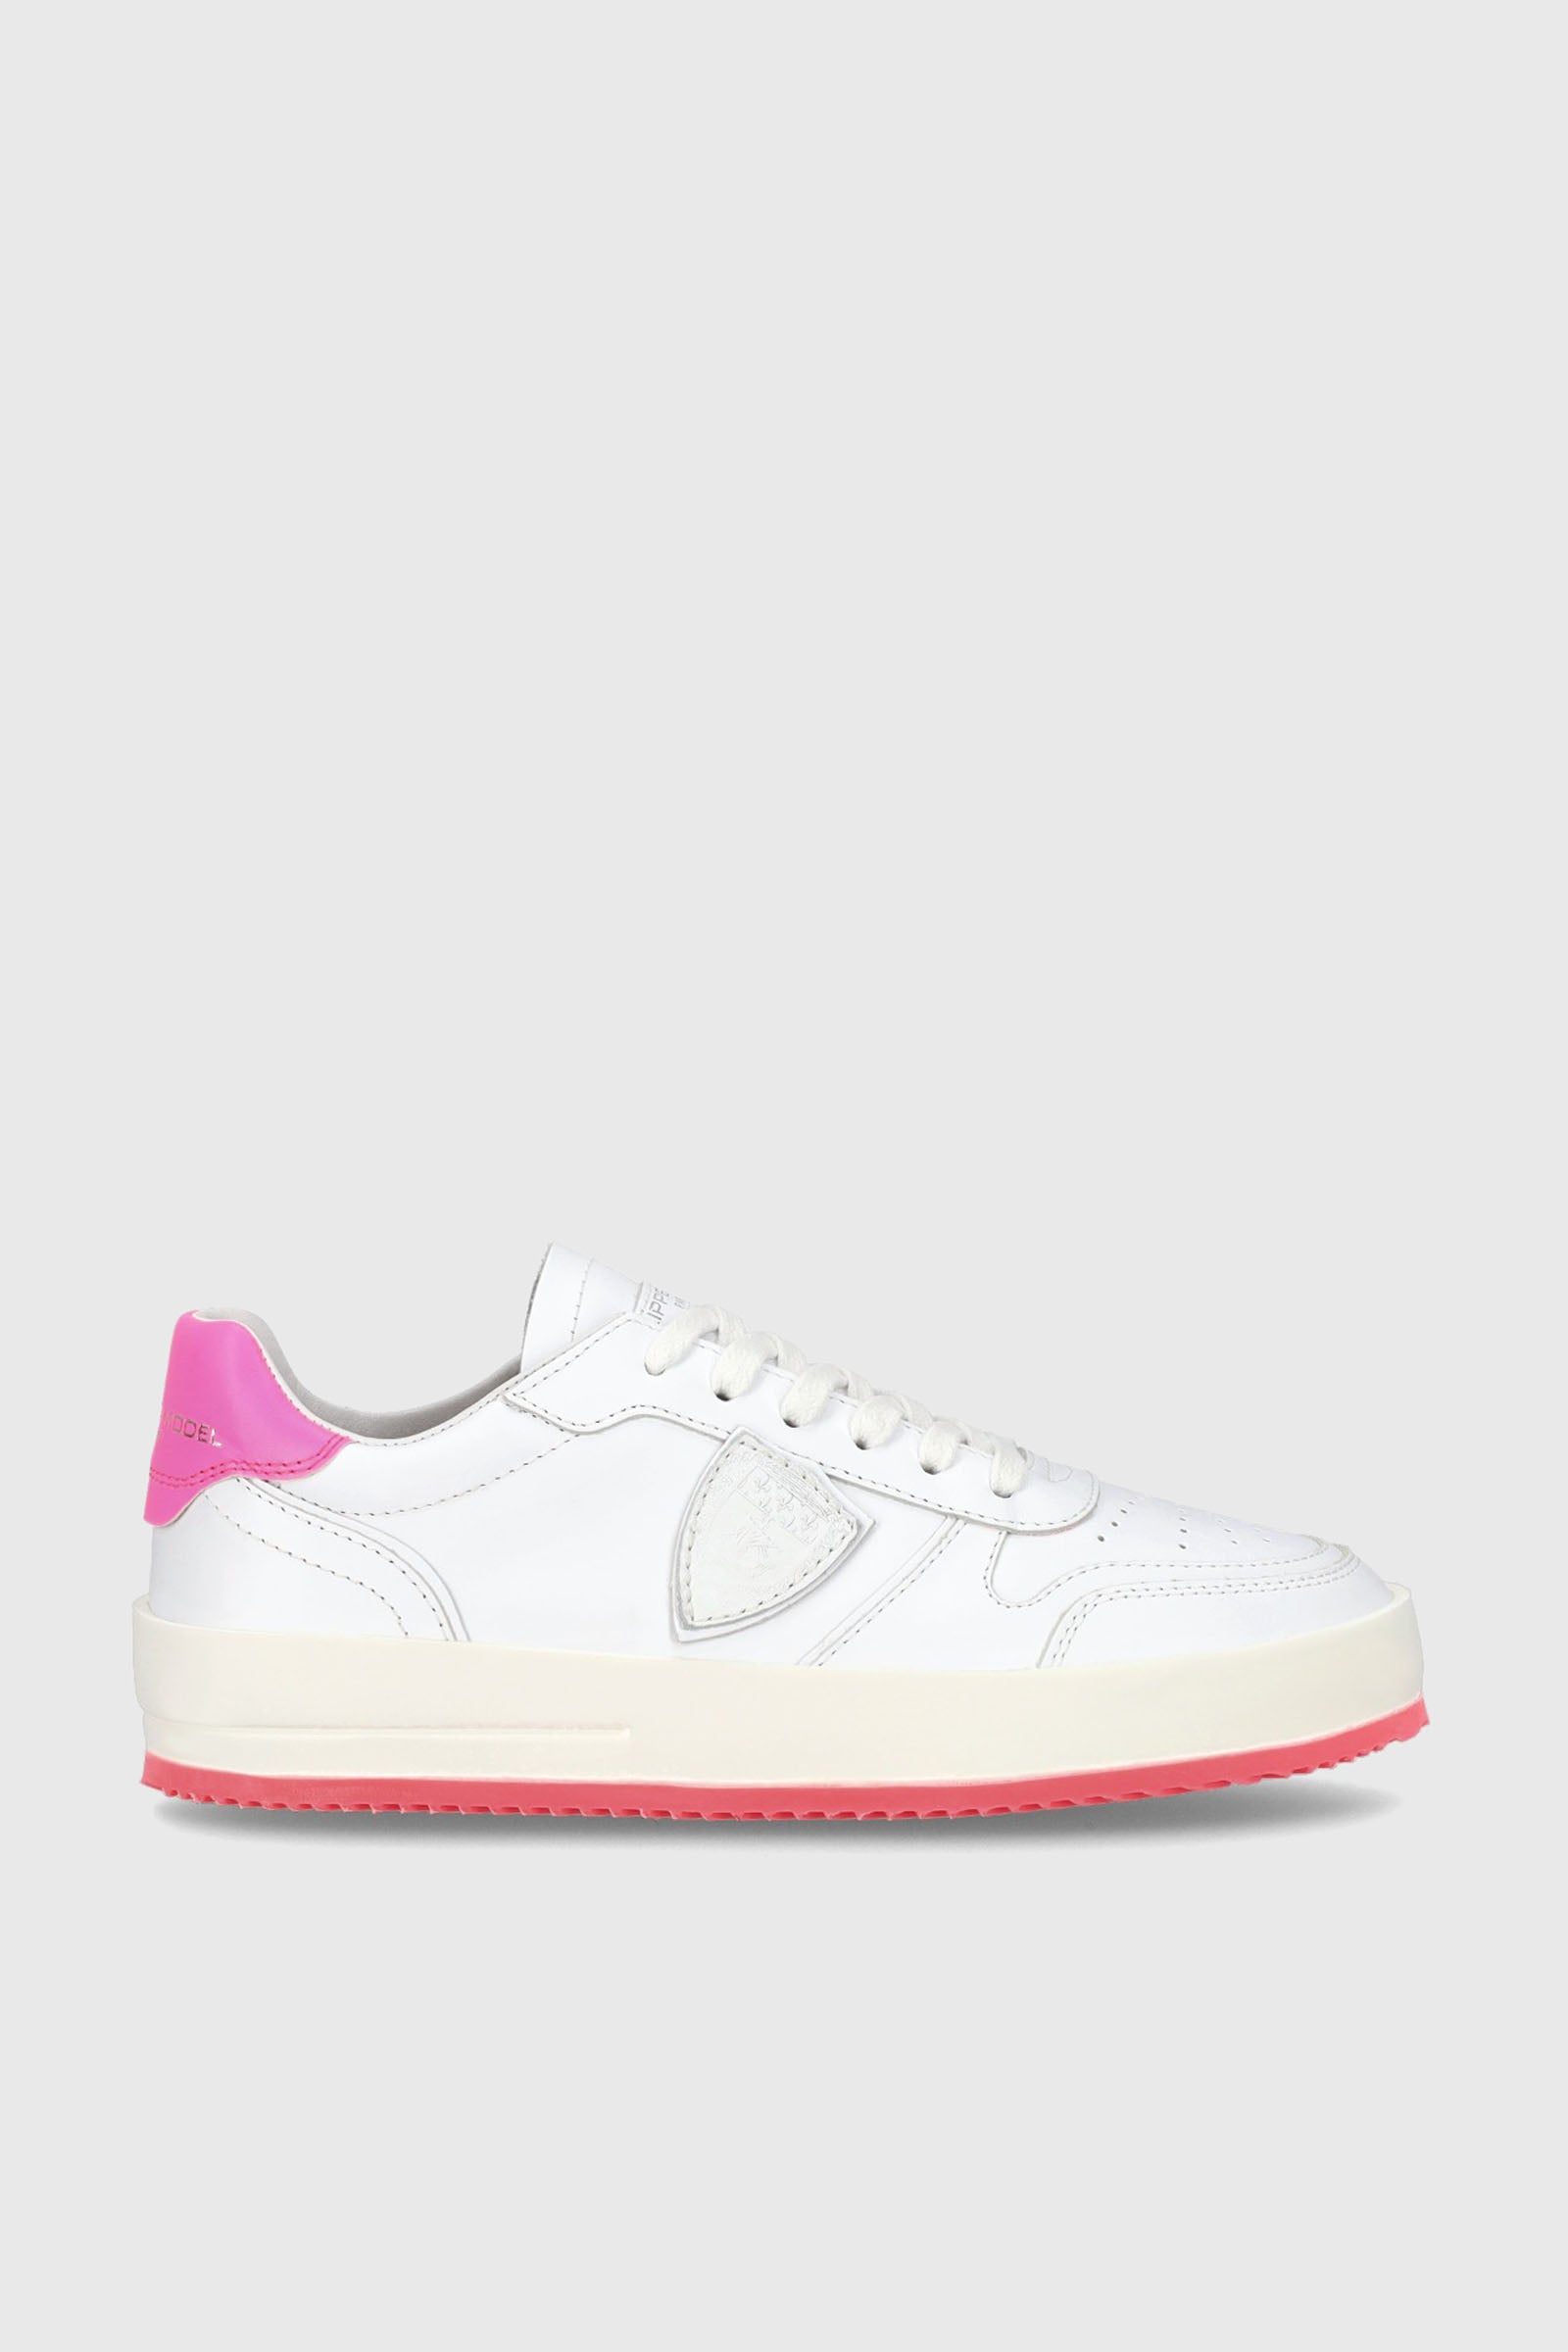 Philippe Model Sneaker Nice Veau Leather White/Fuxia - 1